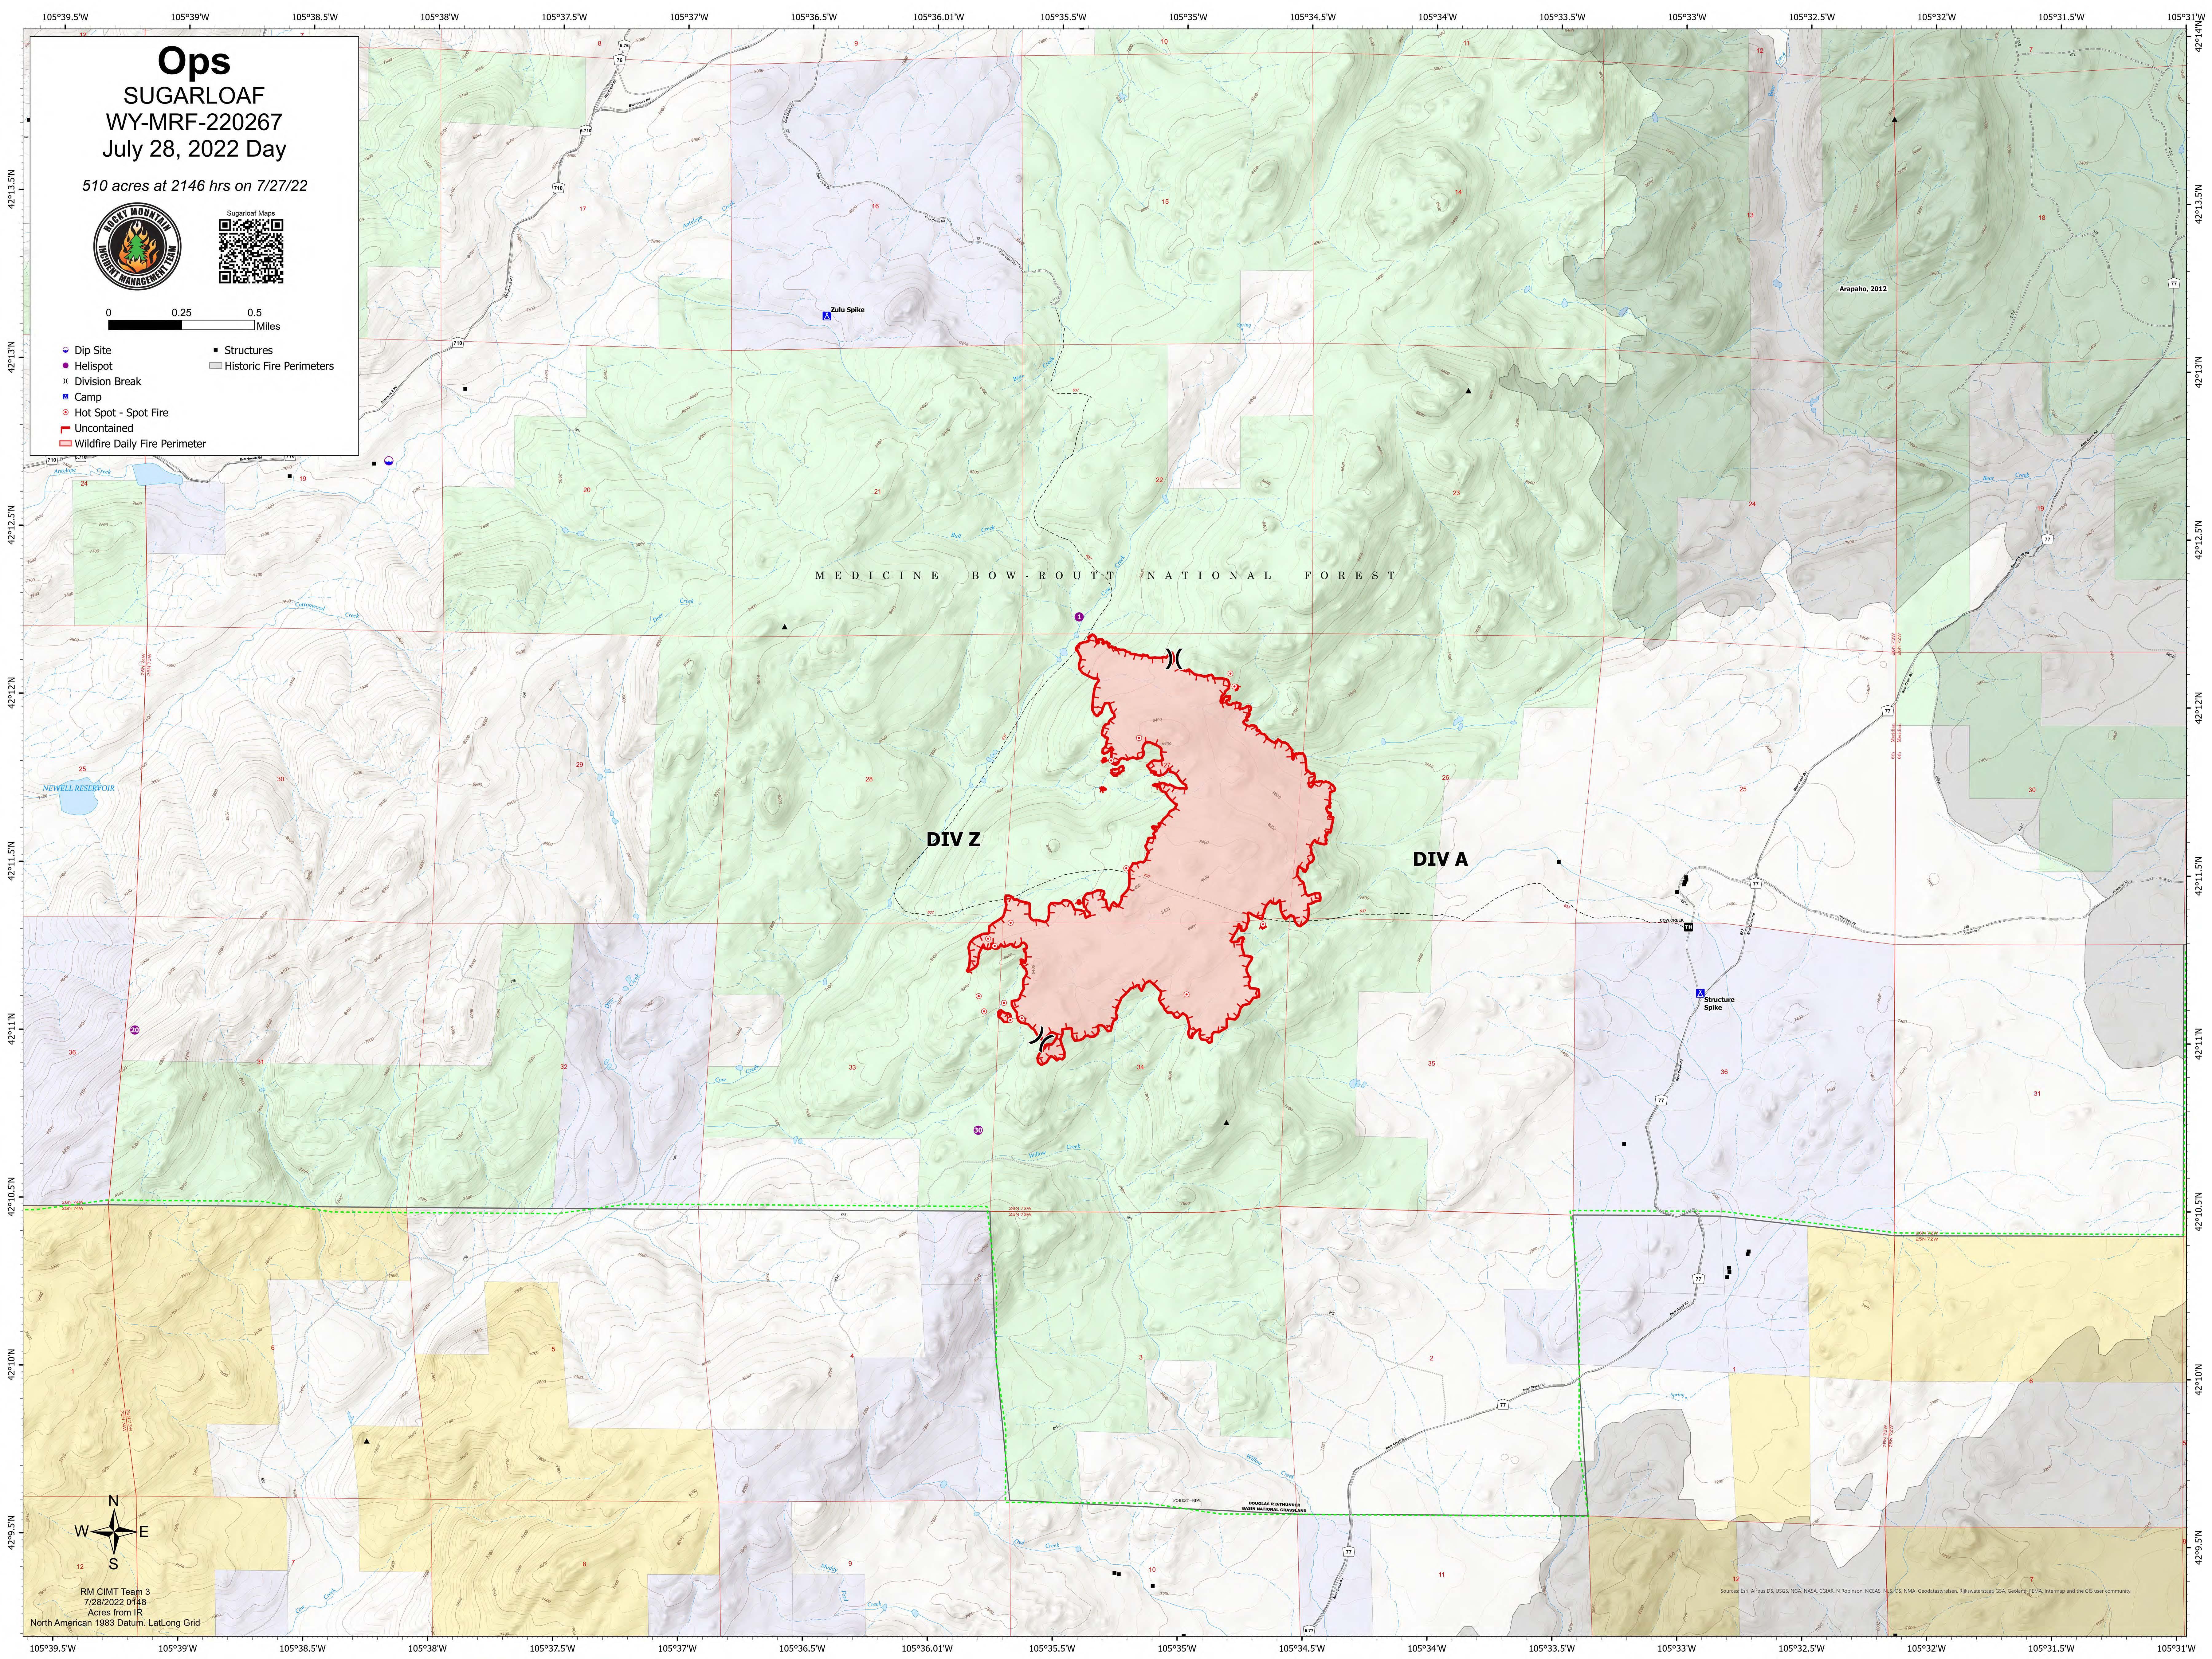 Sugarloaf Fire Operations Map for July 28